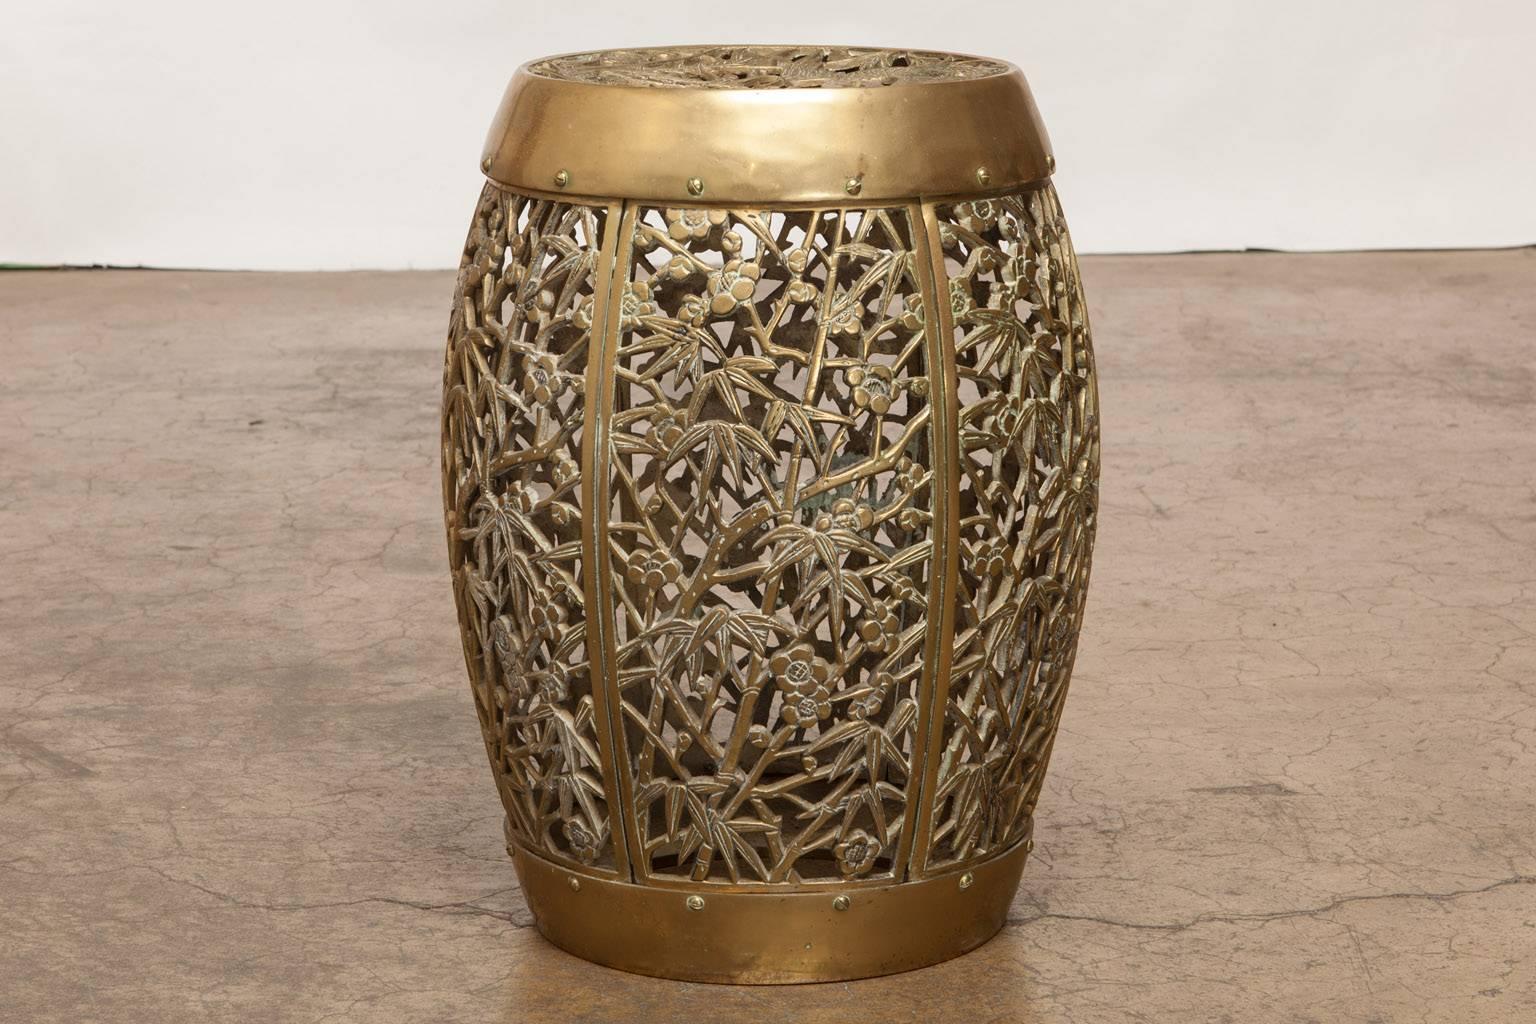 Fantastic Chinese pierced brass drum drink table or garden stool. Made in the tabouret style featuring an elaborate open fretwork cage design of bamboo and foliage on the sides and birds decorate the seat. Deceptively heavy solid piece of furniture